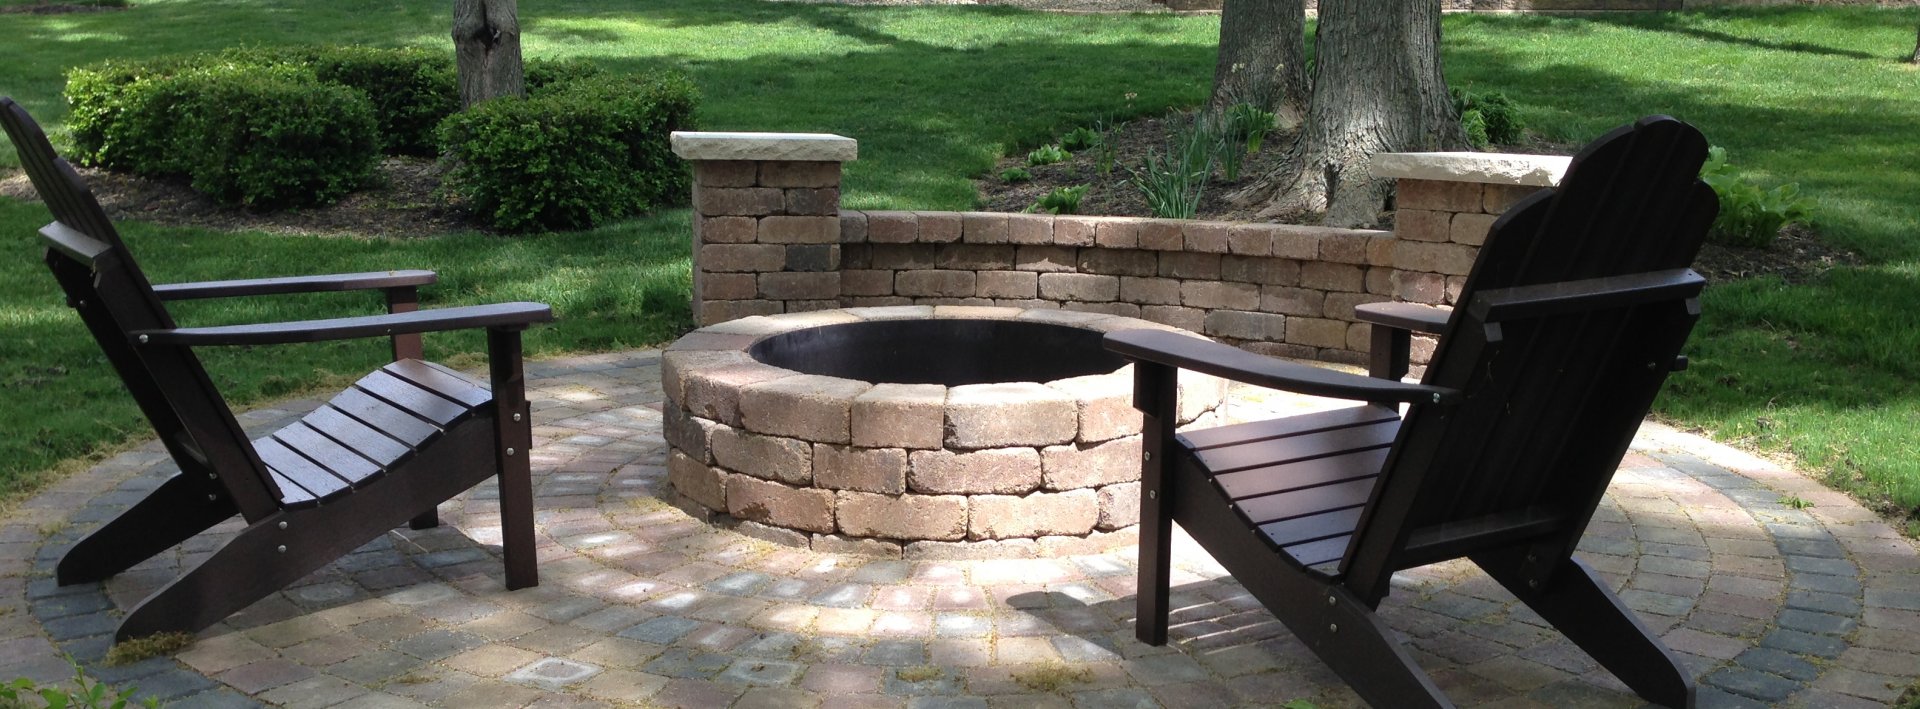 Fire Pit with Chairs